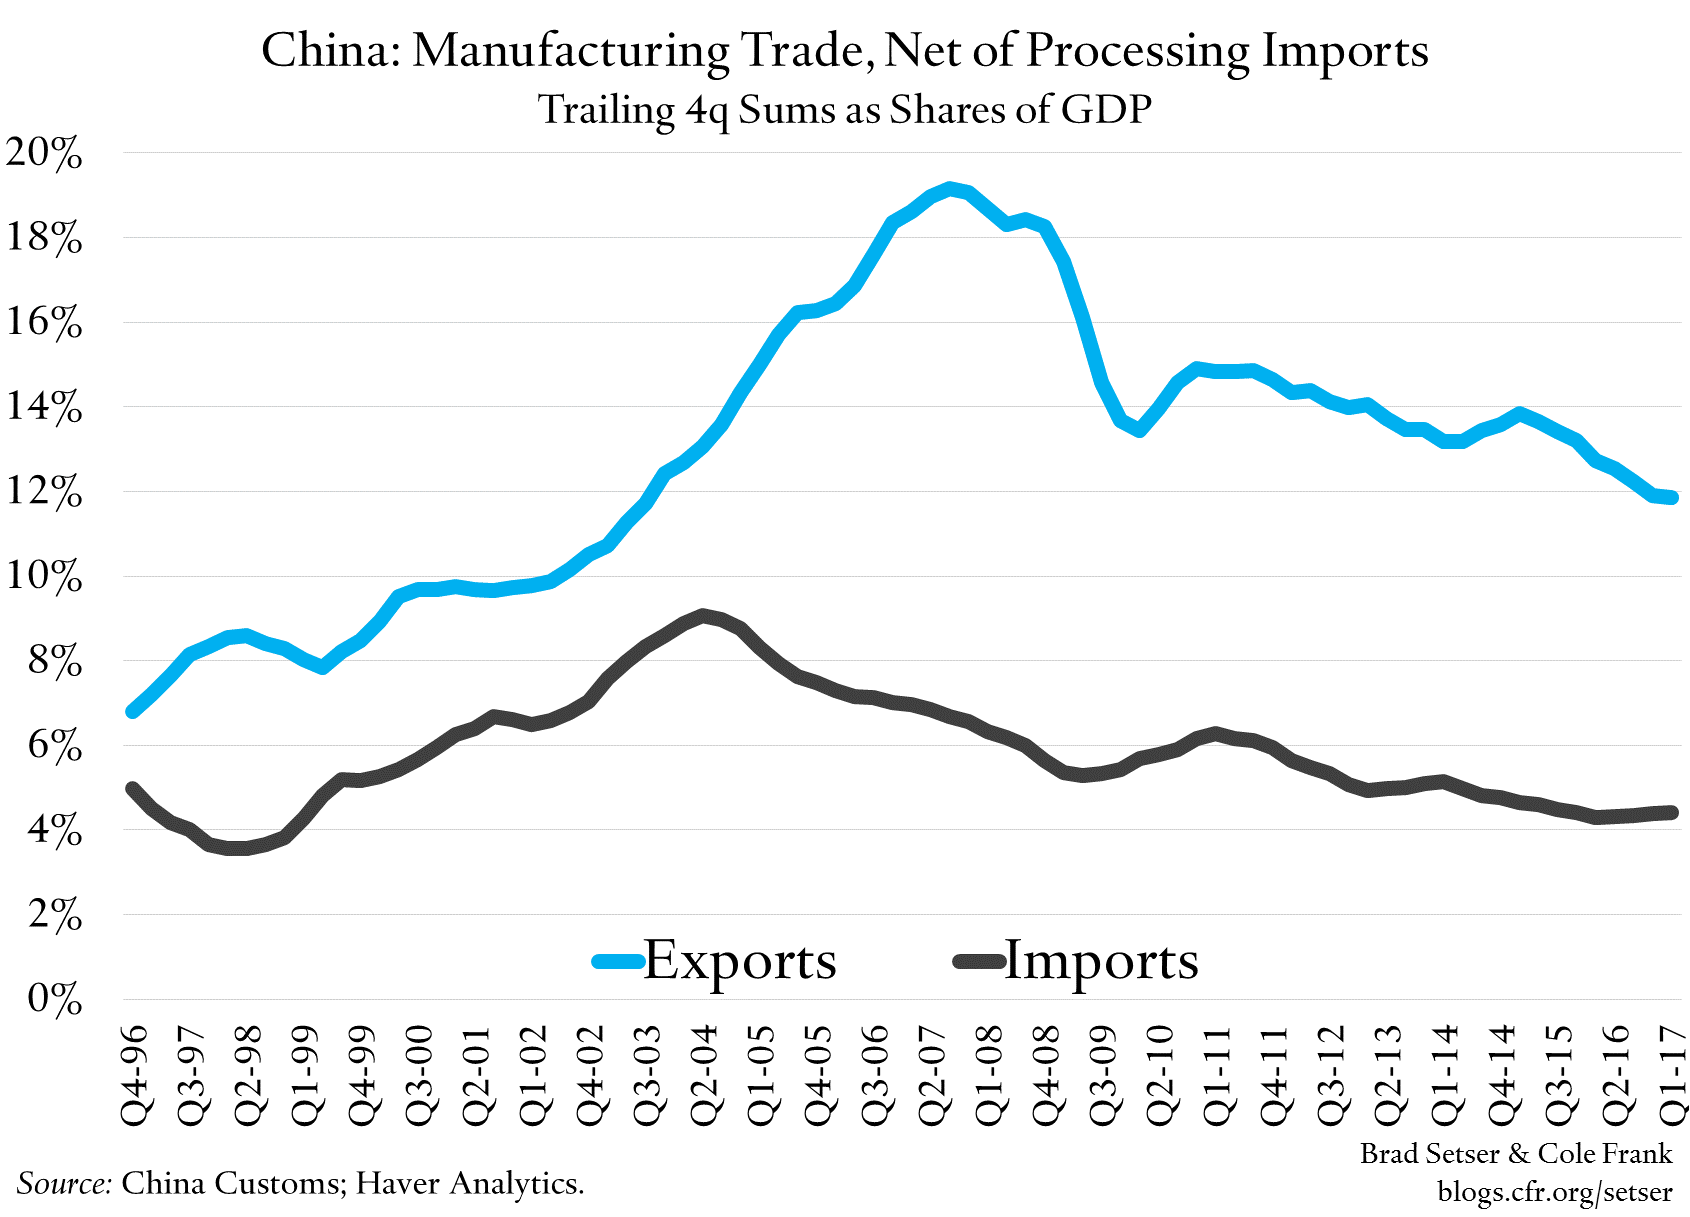 China Still Wants To Import Commodities, Not Manufactures (Judging From The "Early Harvest" Trade Deal)